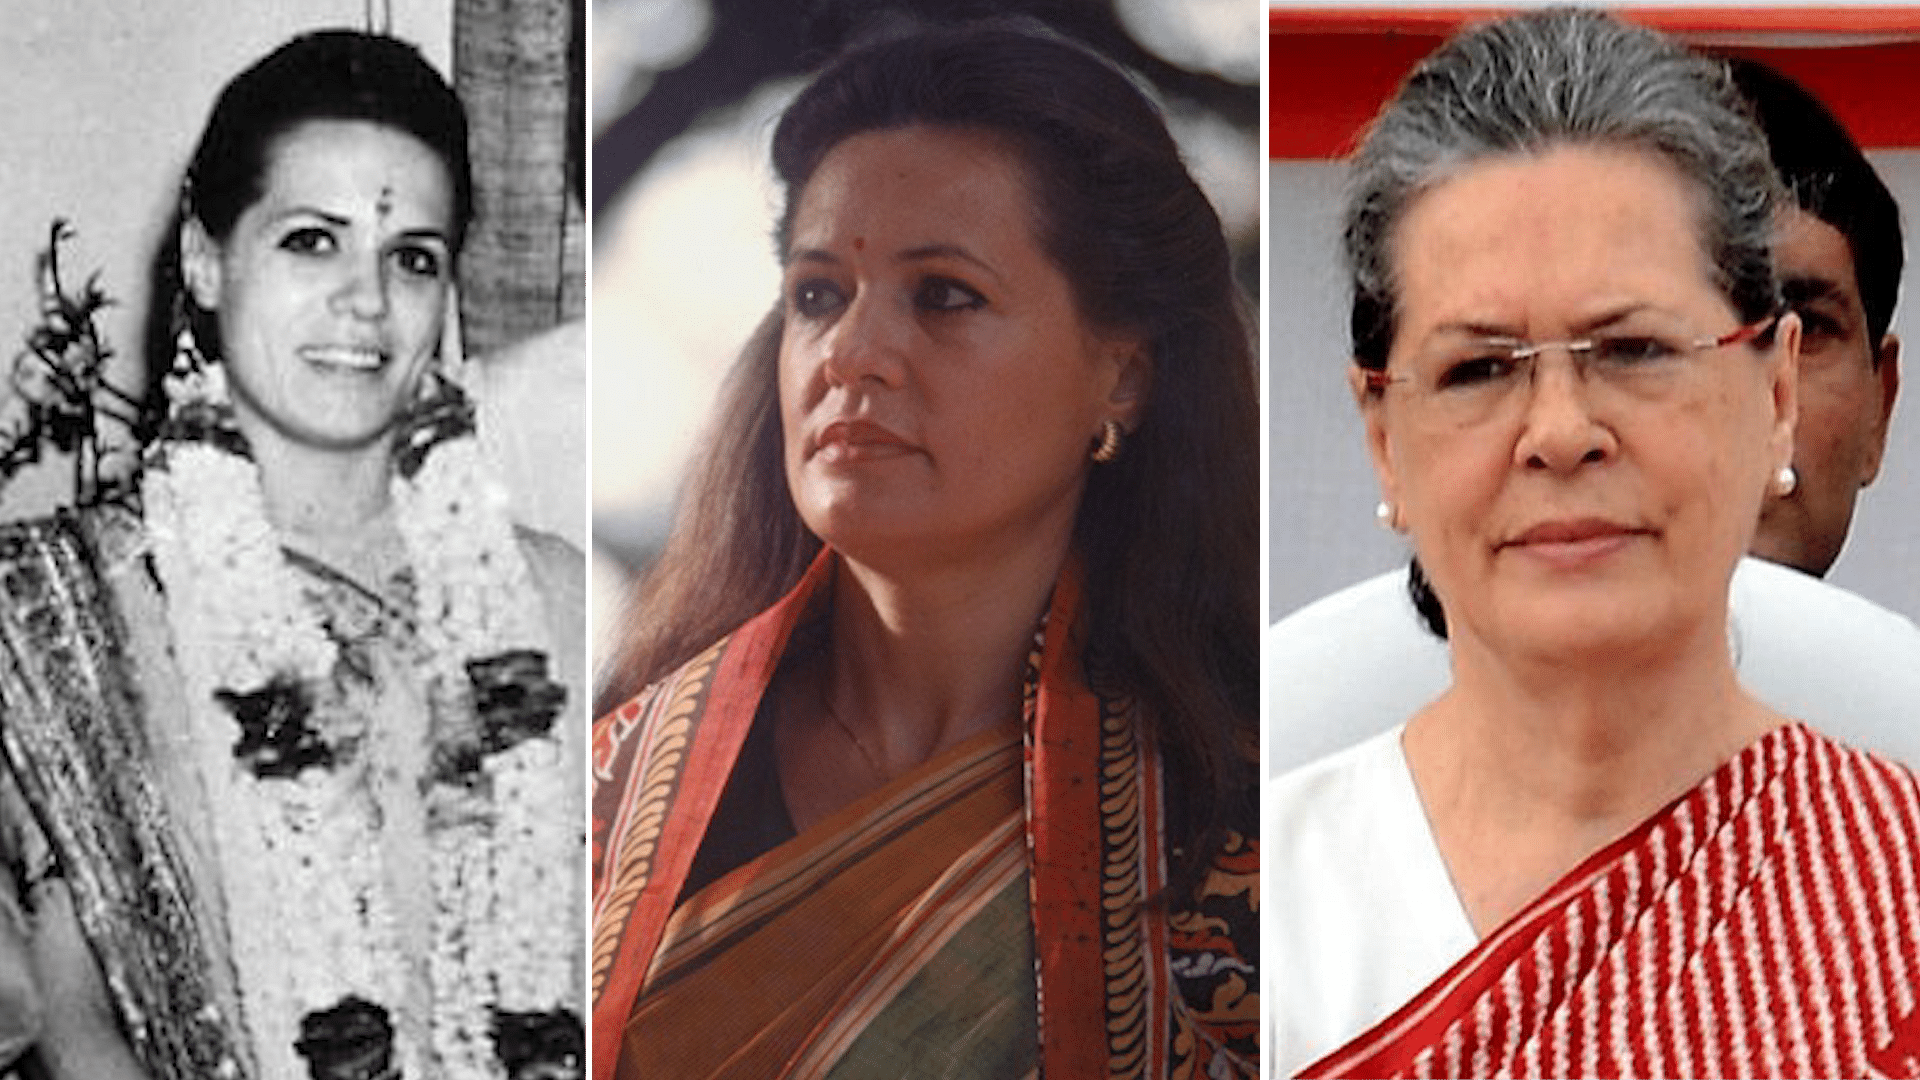 How did Sonia Maino, a resident of Lusiana, Italy, become Sonia Gandhi?